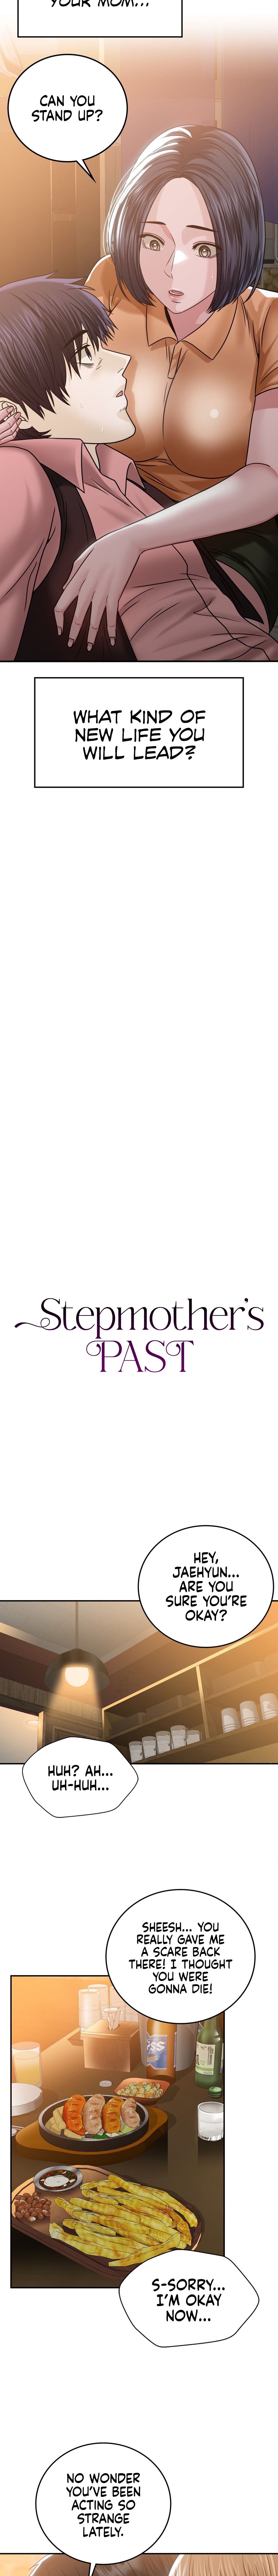 Stepmother’s Past NEW image